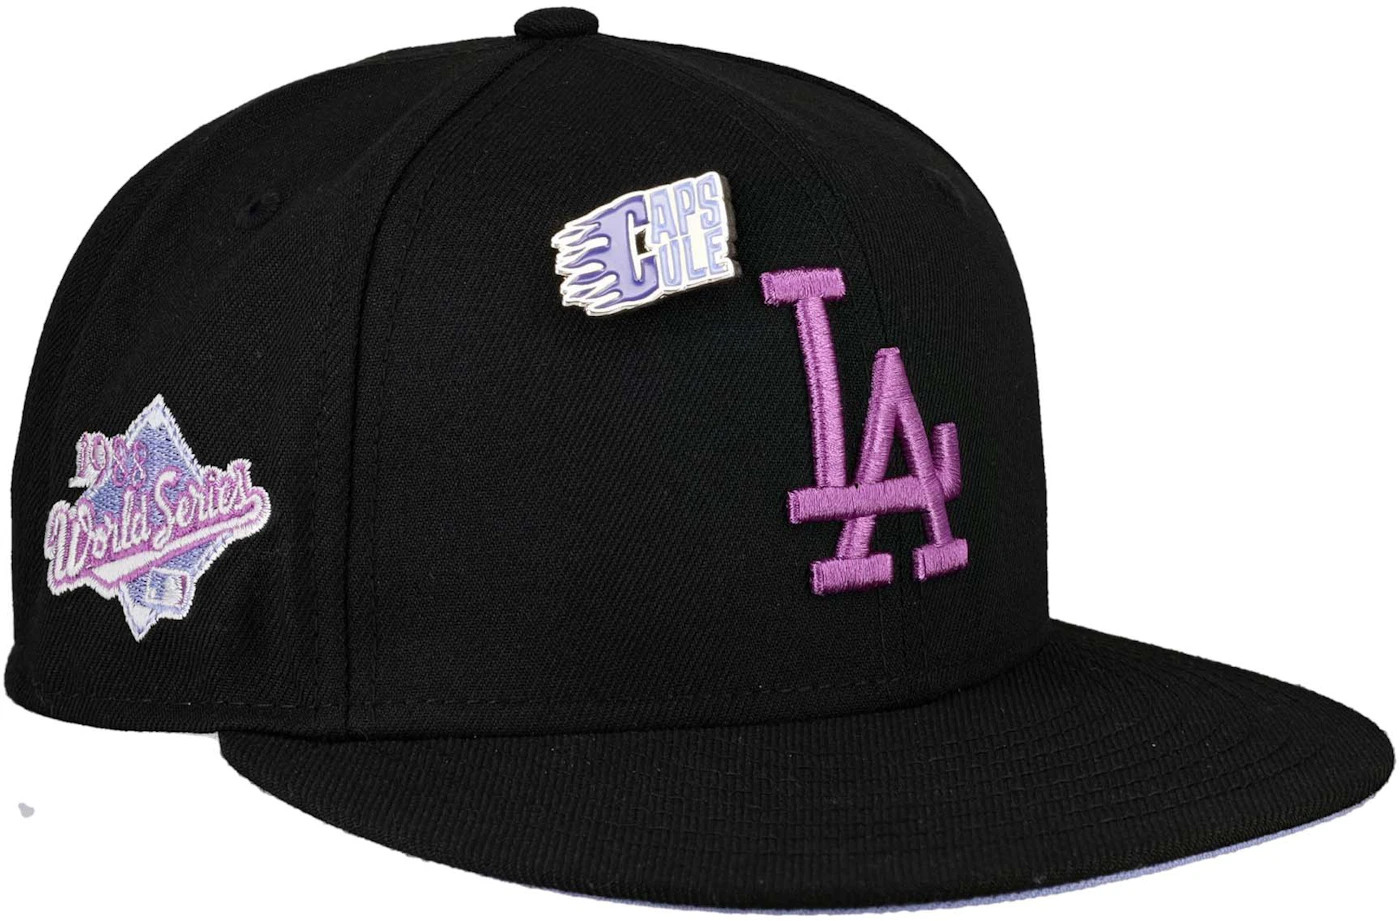 New Era 59Fifty 50th Anniversary LA Dodgers Fitted Cap Lavender